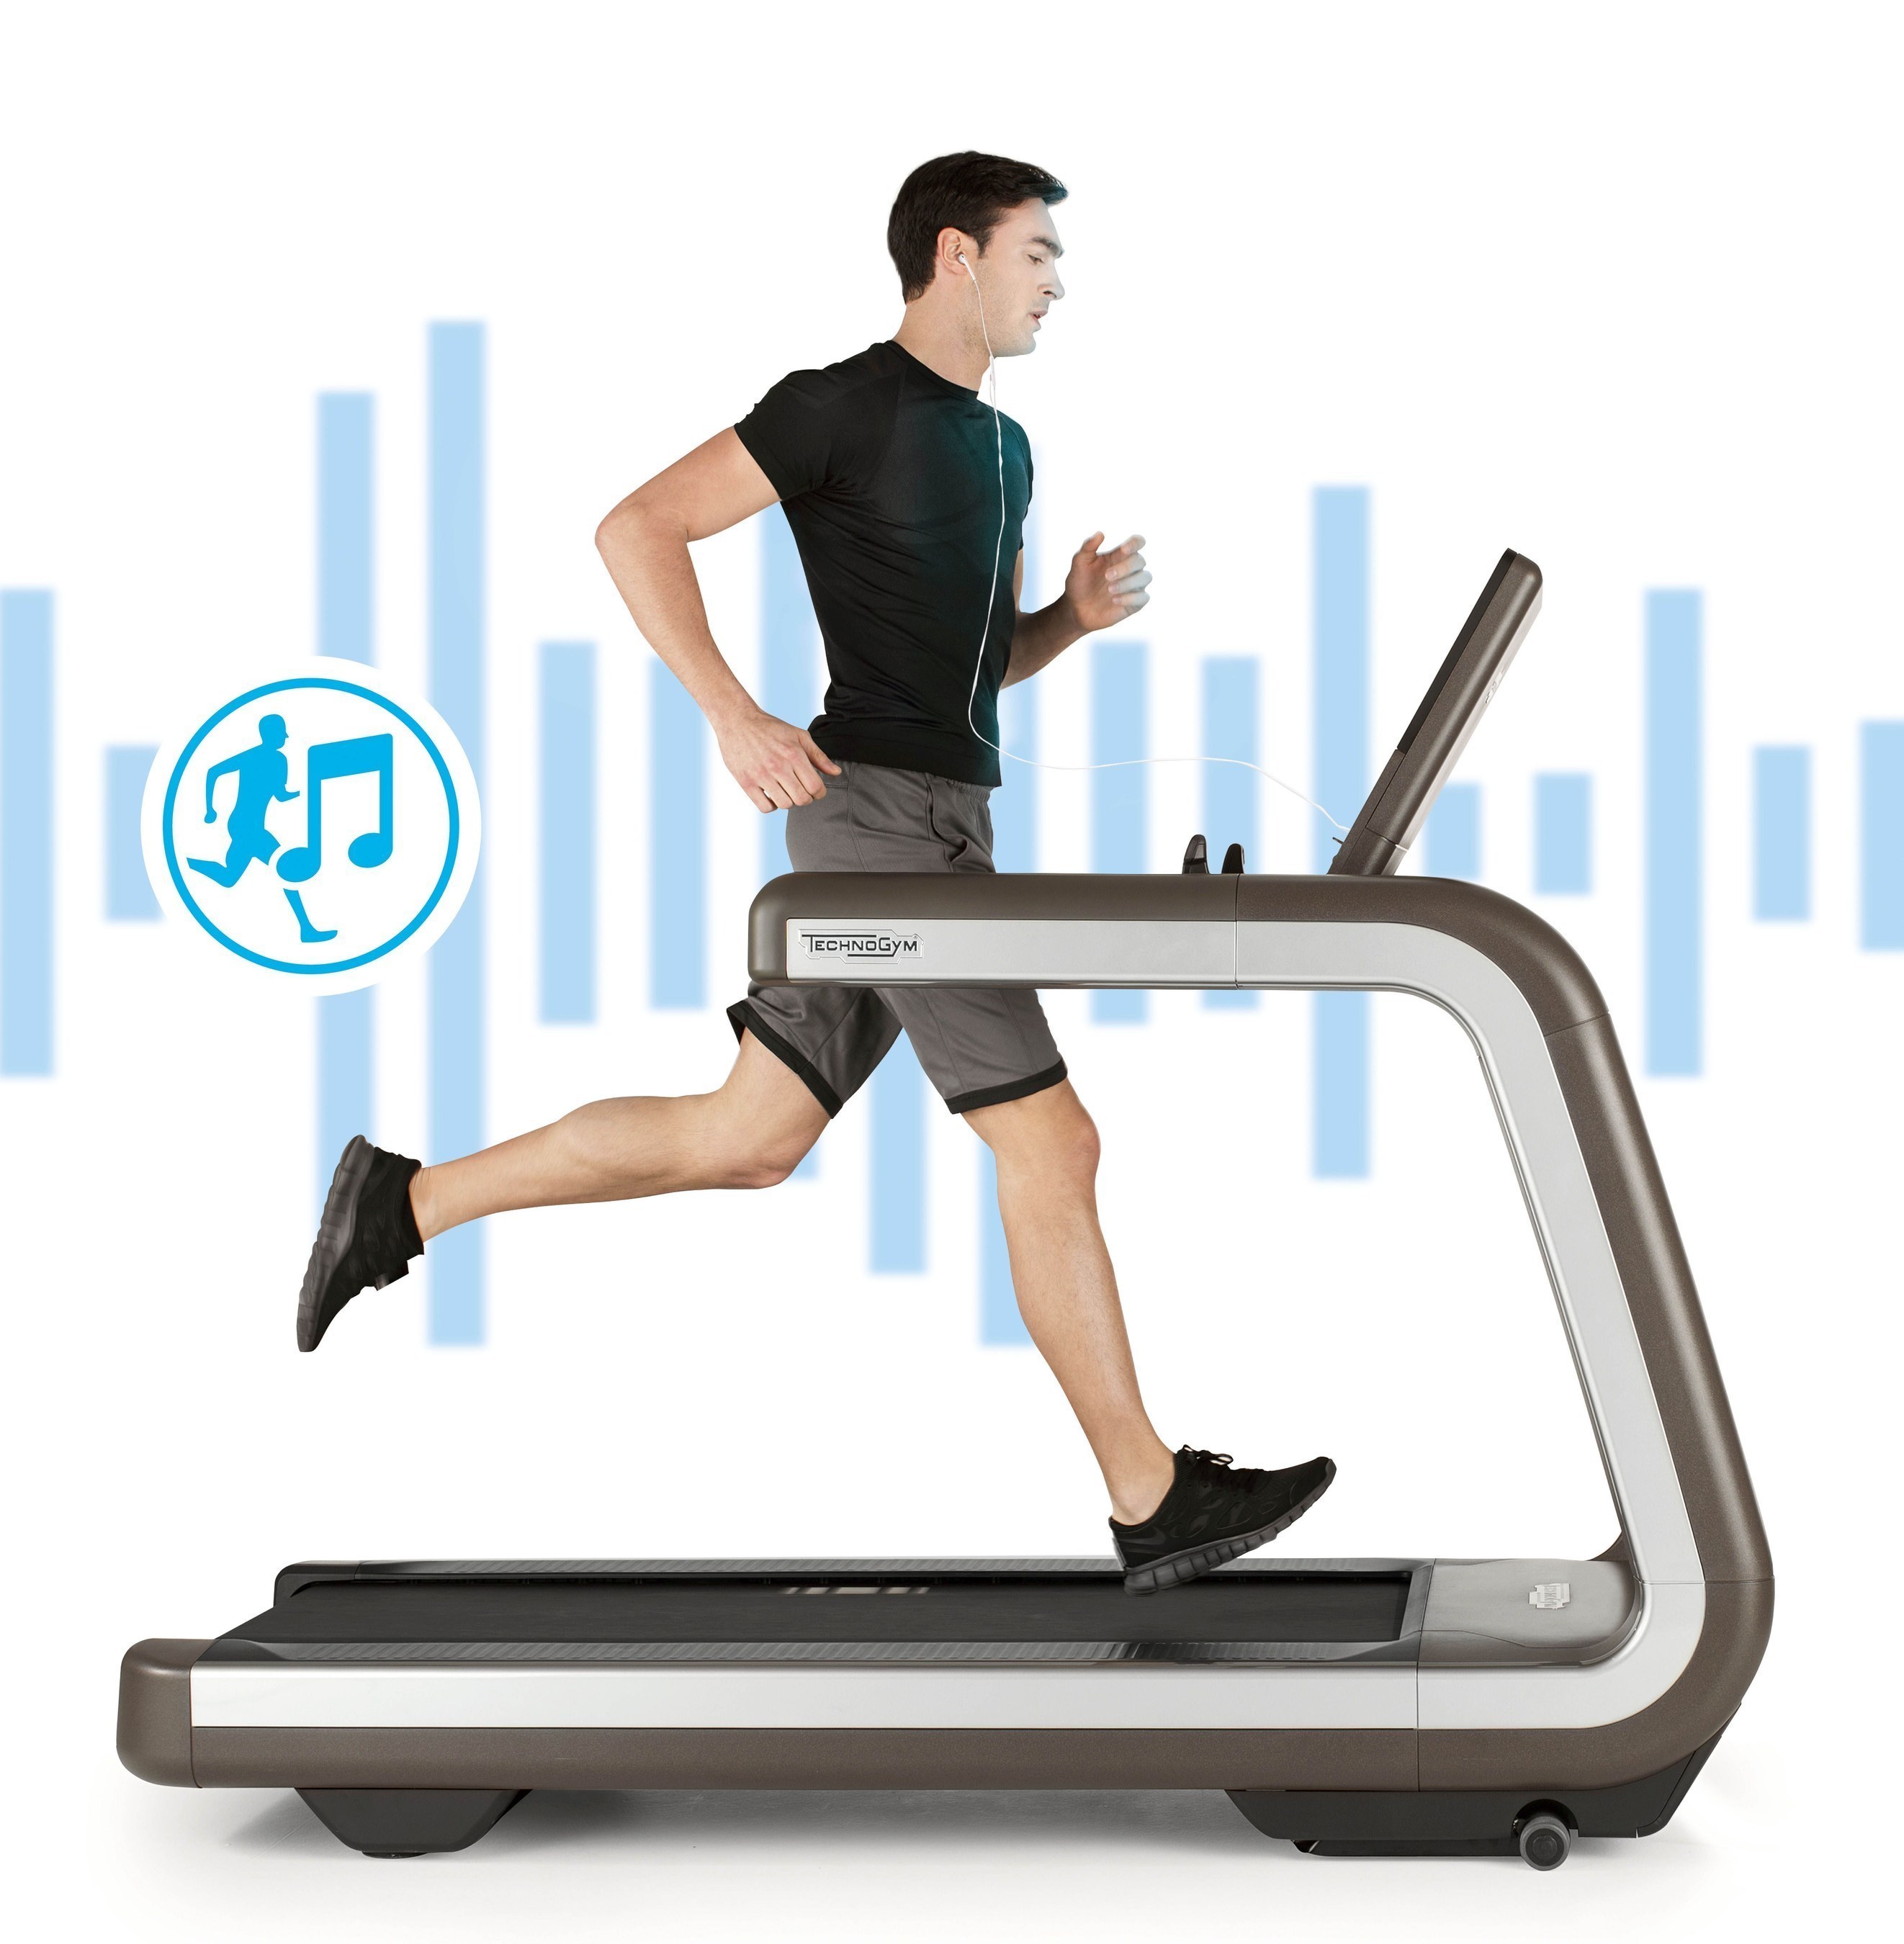 FIRST MUSIC INTERACTIVE TREADMILL BY TECHNOGYM (PRNewsFoto/Technogym) (PRNewsFoto/Technogym)